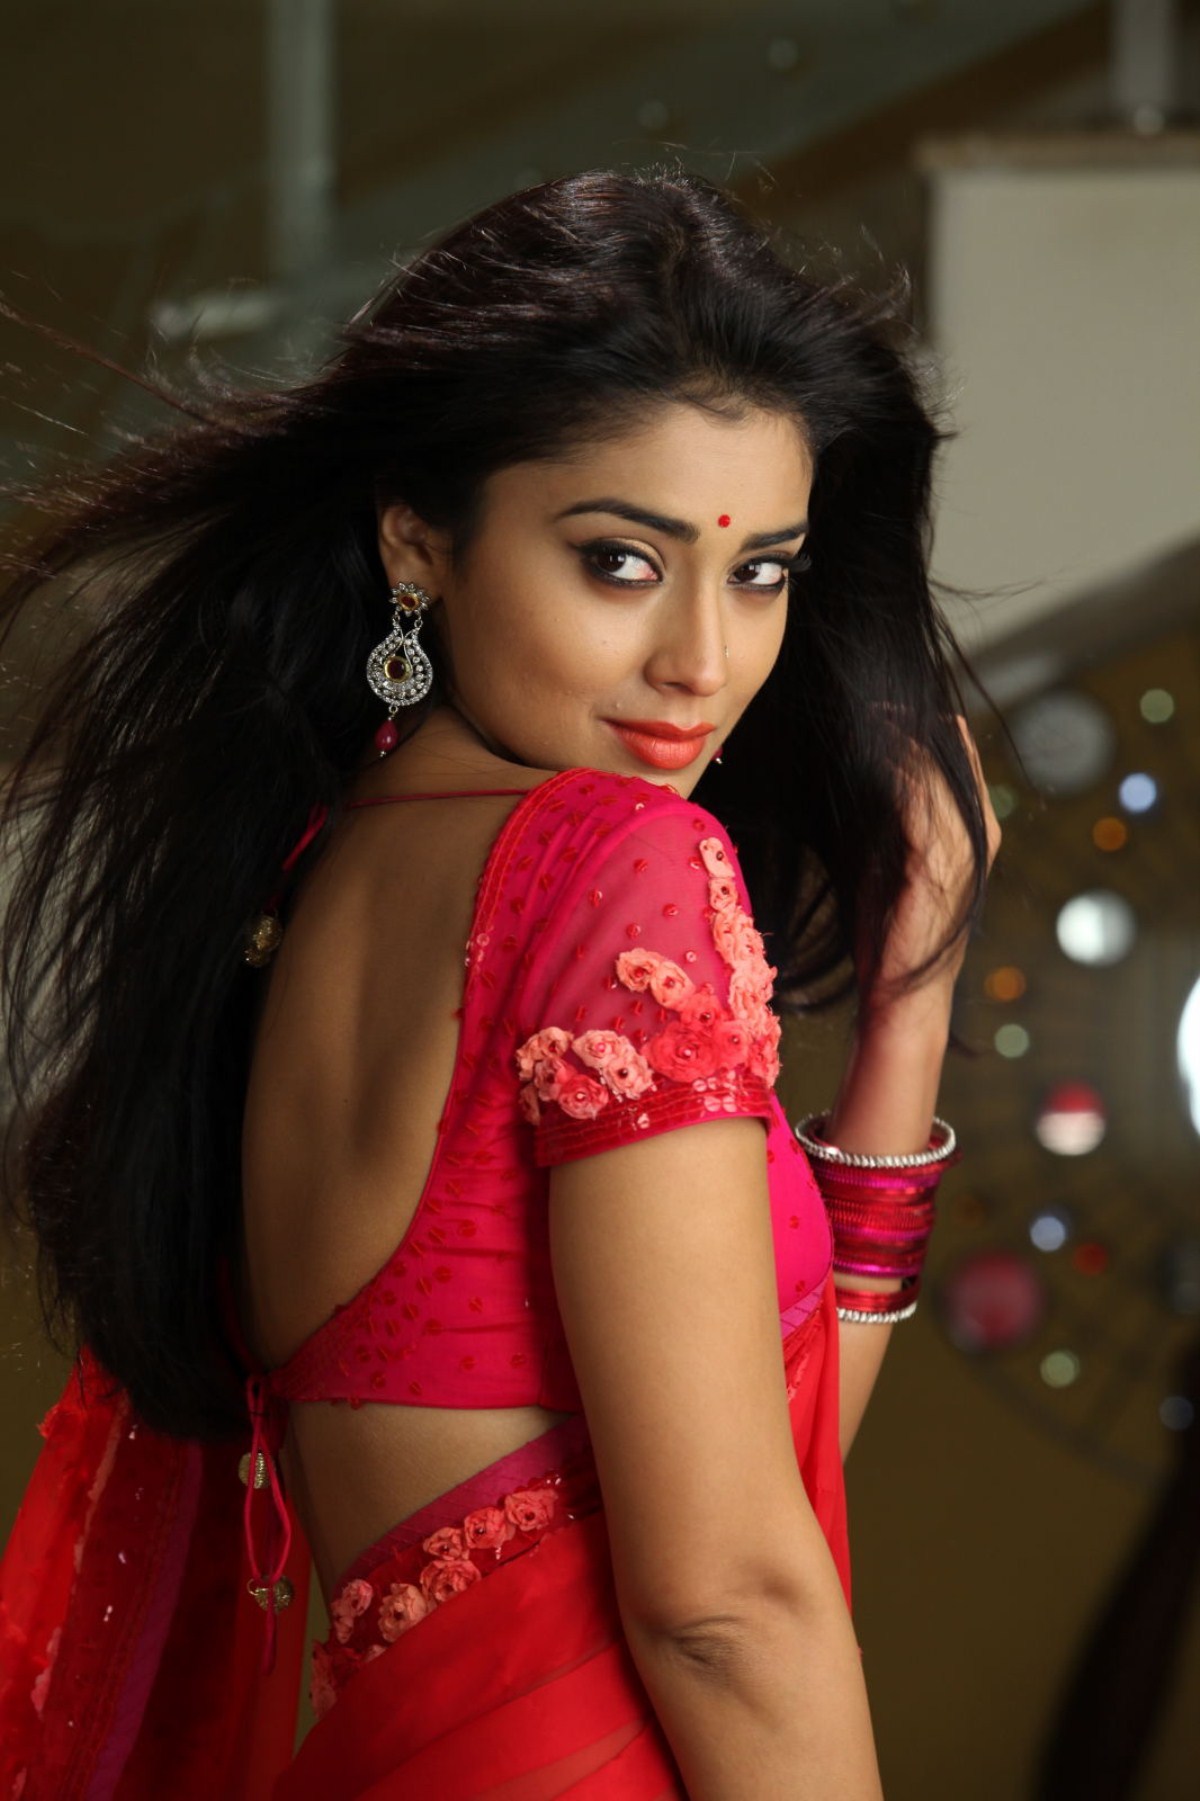 Best Of Shriya Saran Hot And Sexy Photo Wallpapers Latest Image Gallery Hd Pics